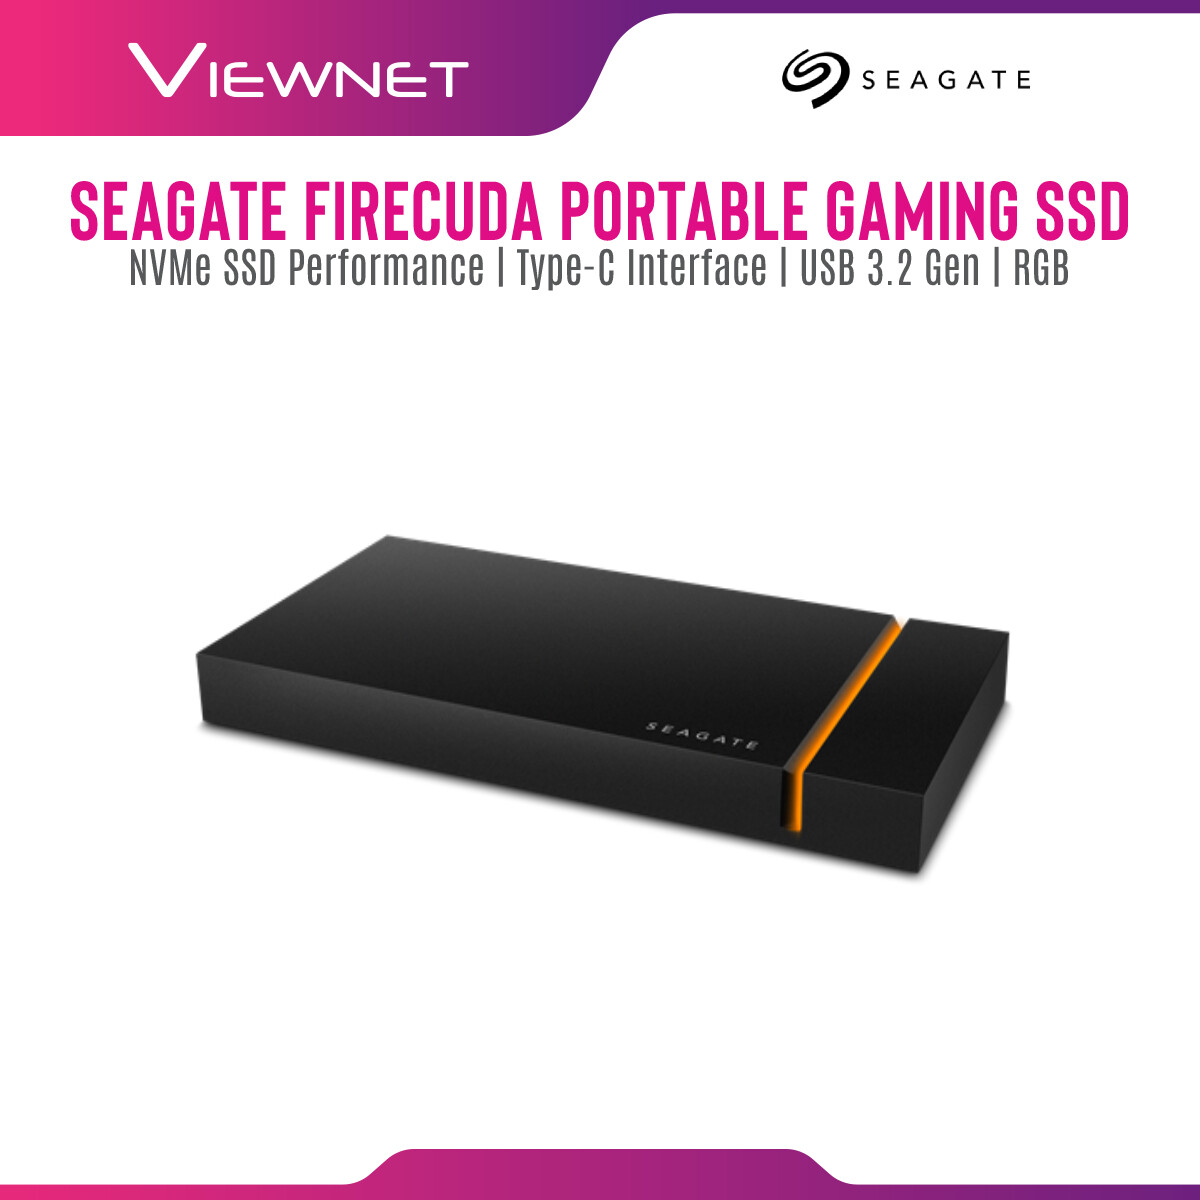 Seagate FireCuda Gaming SSD (1TB) with USB-C Connection, Up To 2000MB/s Transfer Speed, Customisable RGB LED Lighting , USB 3.2Gen 2x2, NVMe SSD Performance